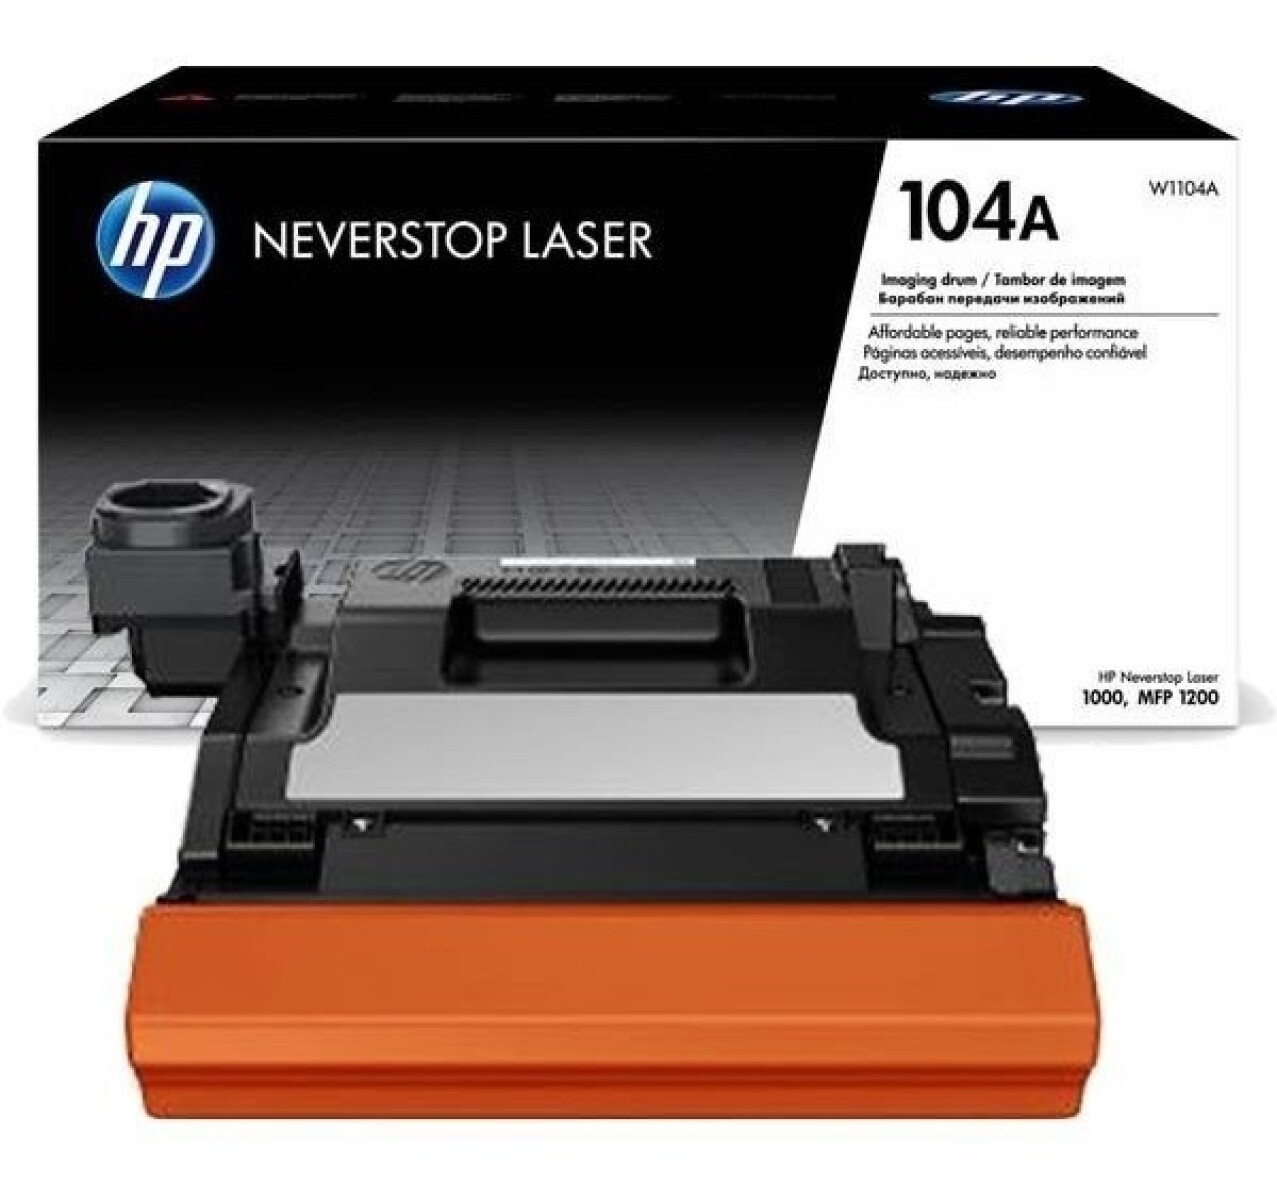 HP IMAGE DRUM W1104A 104A NEVERSTOP 1000/1001/1020/1200 - Hp Image Drum W1104a 104a Neverstop 1000/1001/1020/1200 